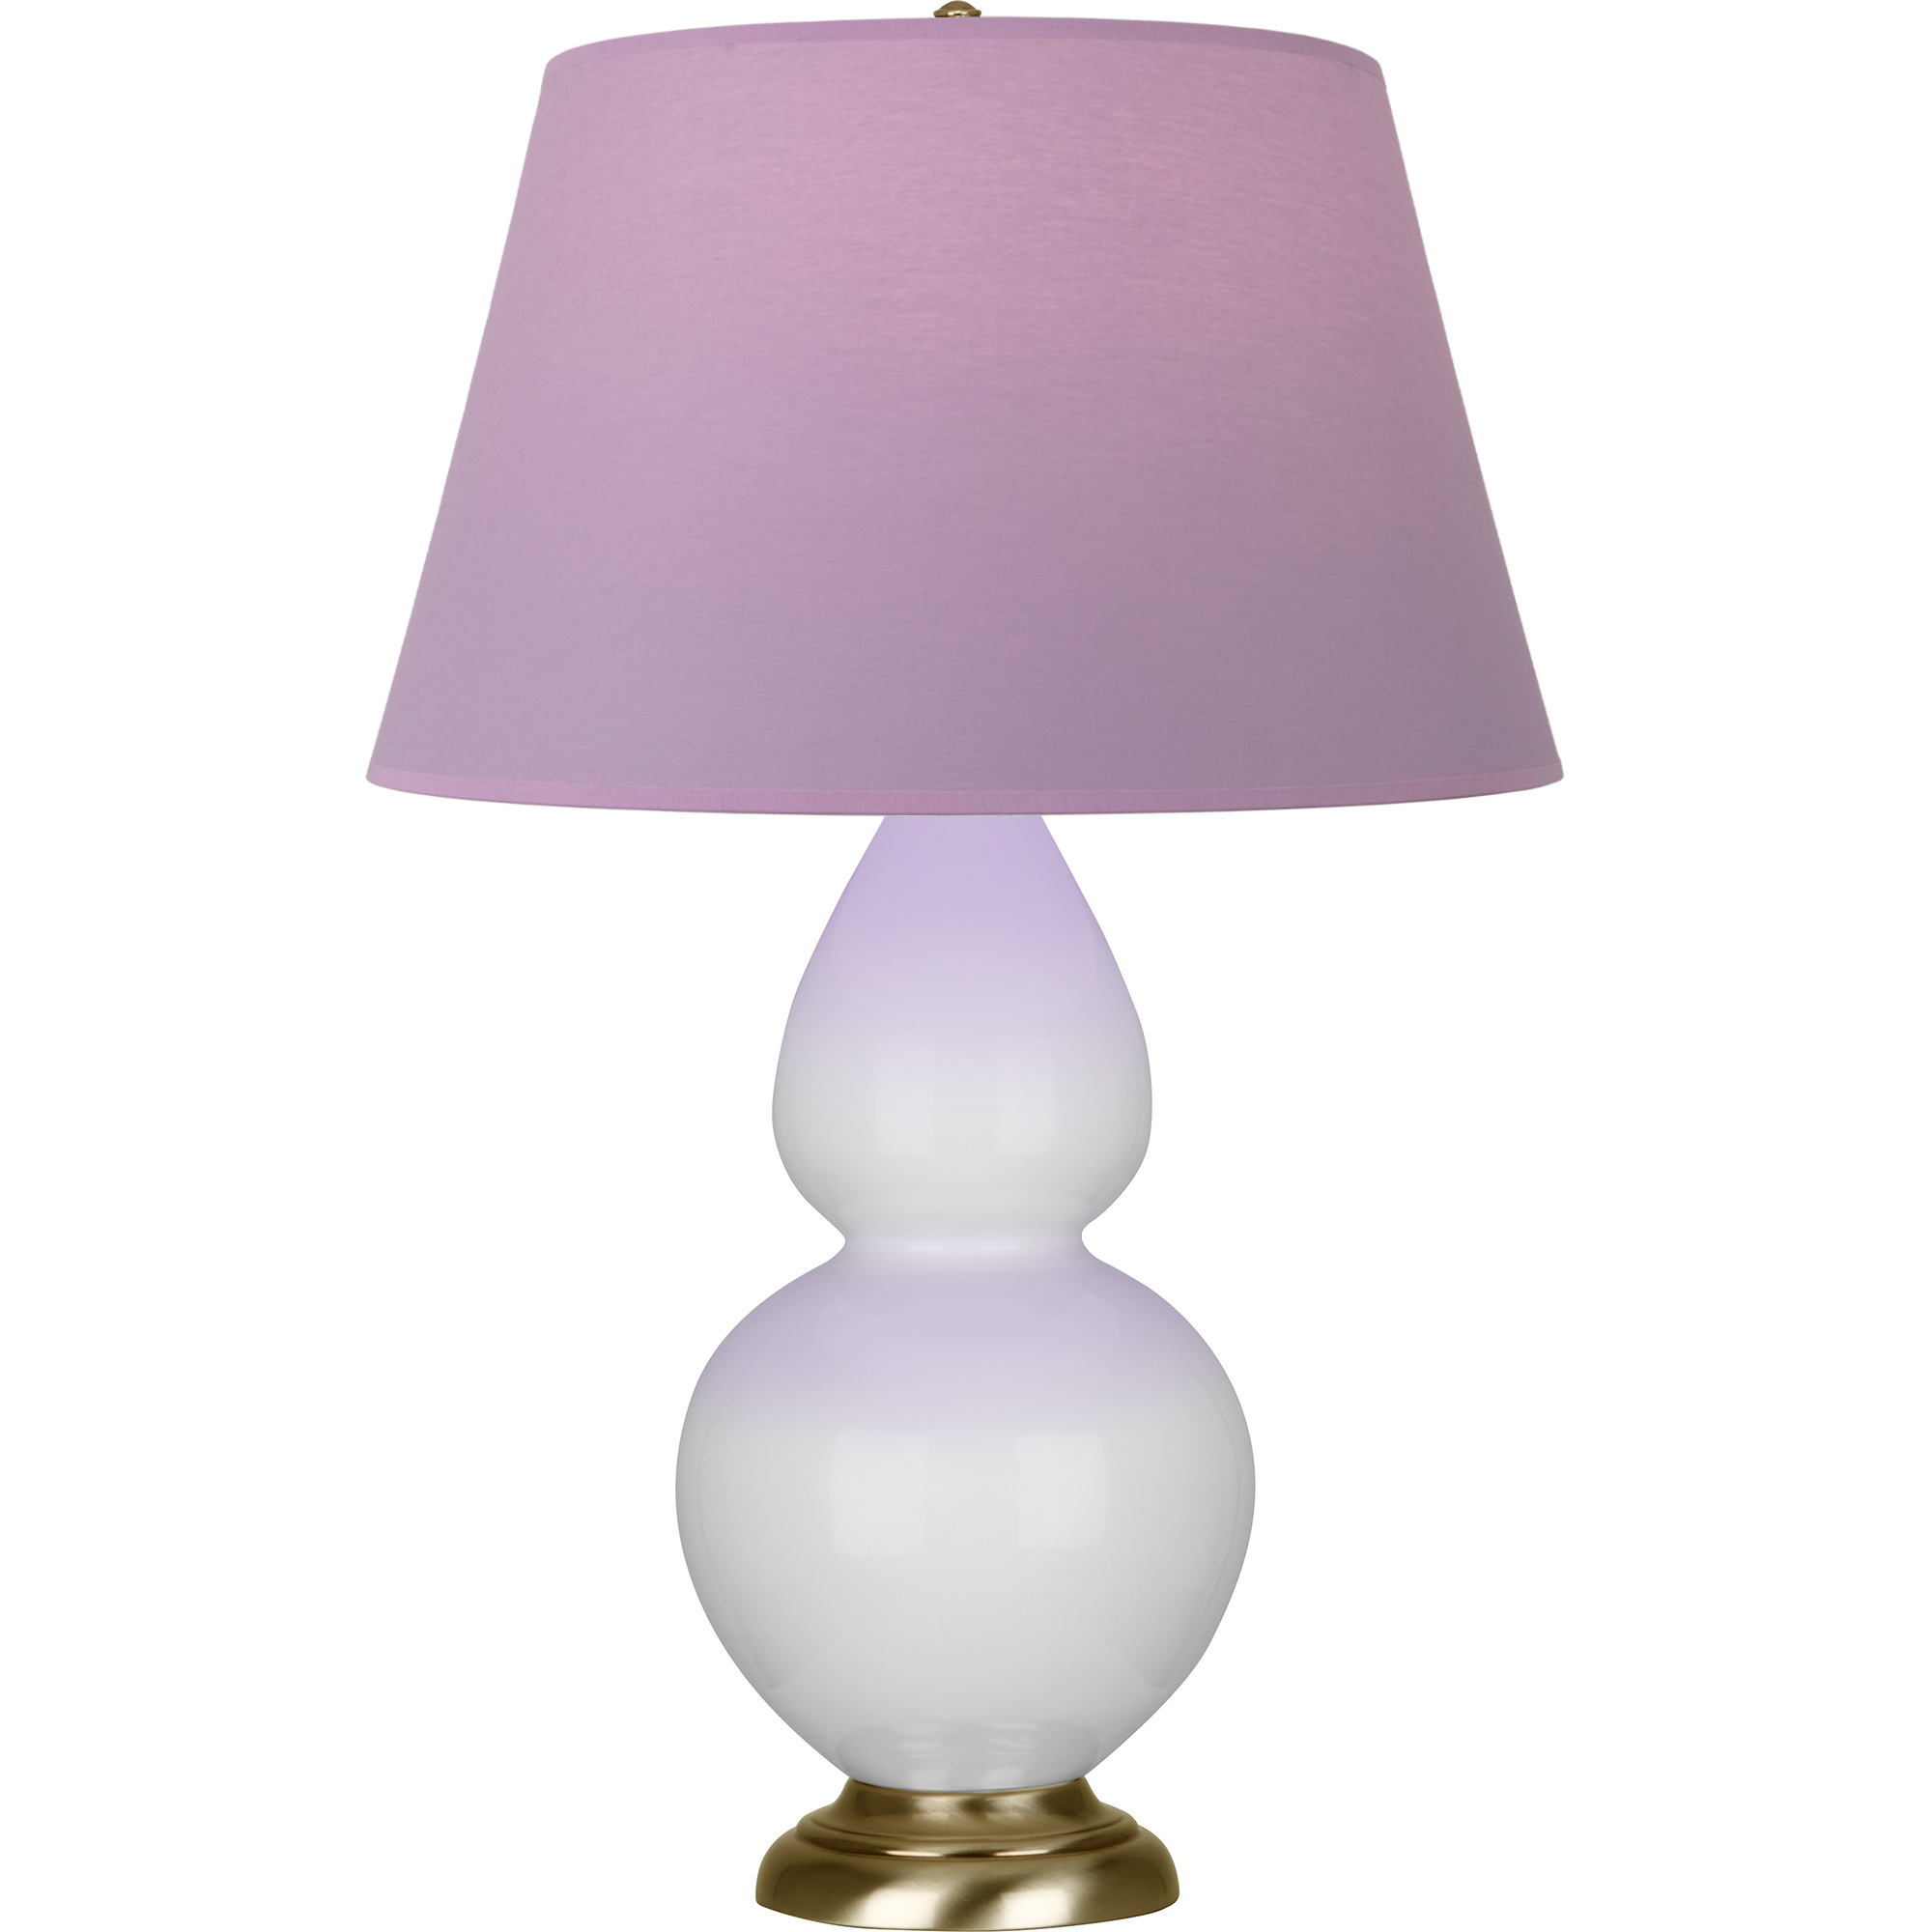 Double Gourd Table Lamp Style #DY20L